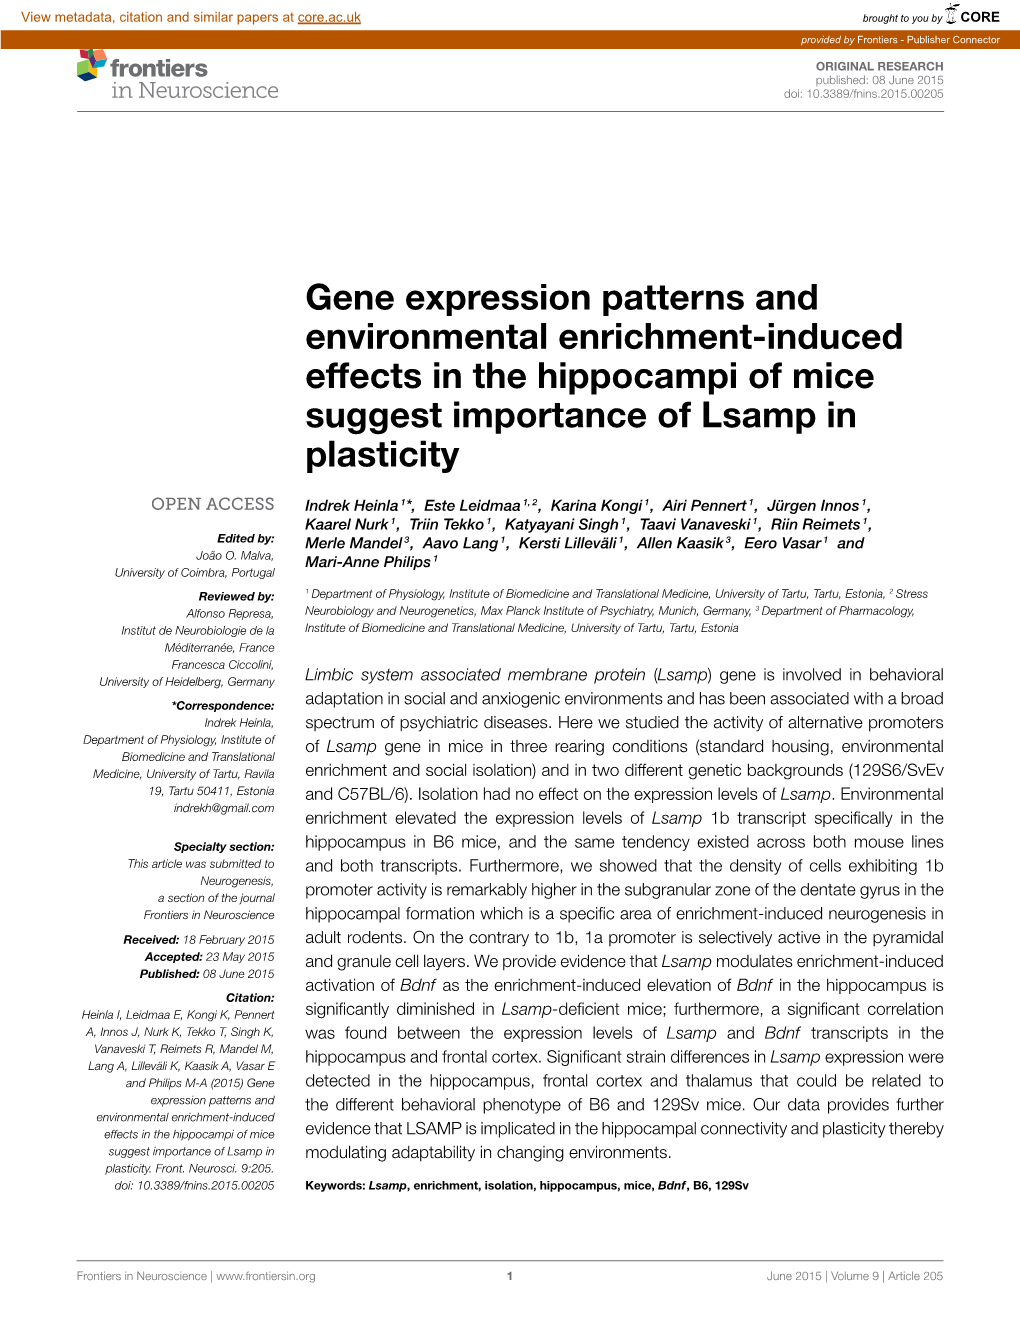 Gene Expression Patterns and Environmental Enrichment-Induced Effects in the Hippocampi of Mice Suggest Importance of Lsamp in Plasticity